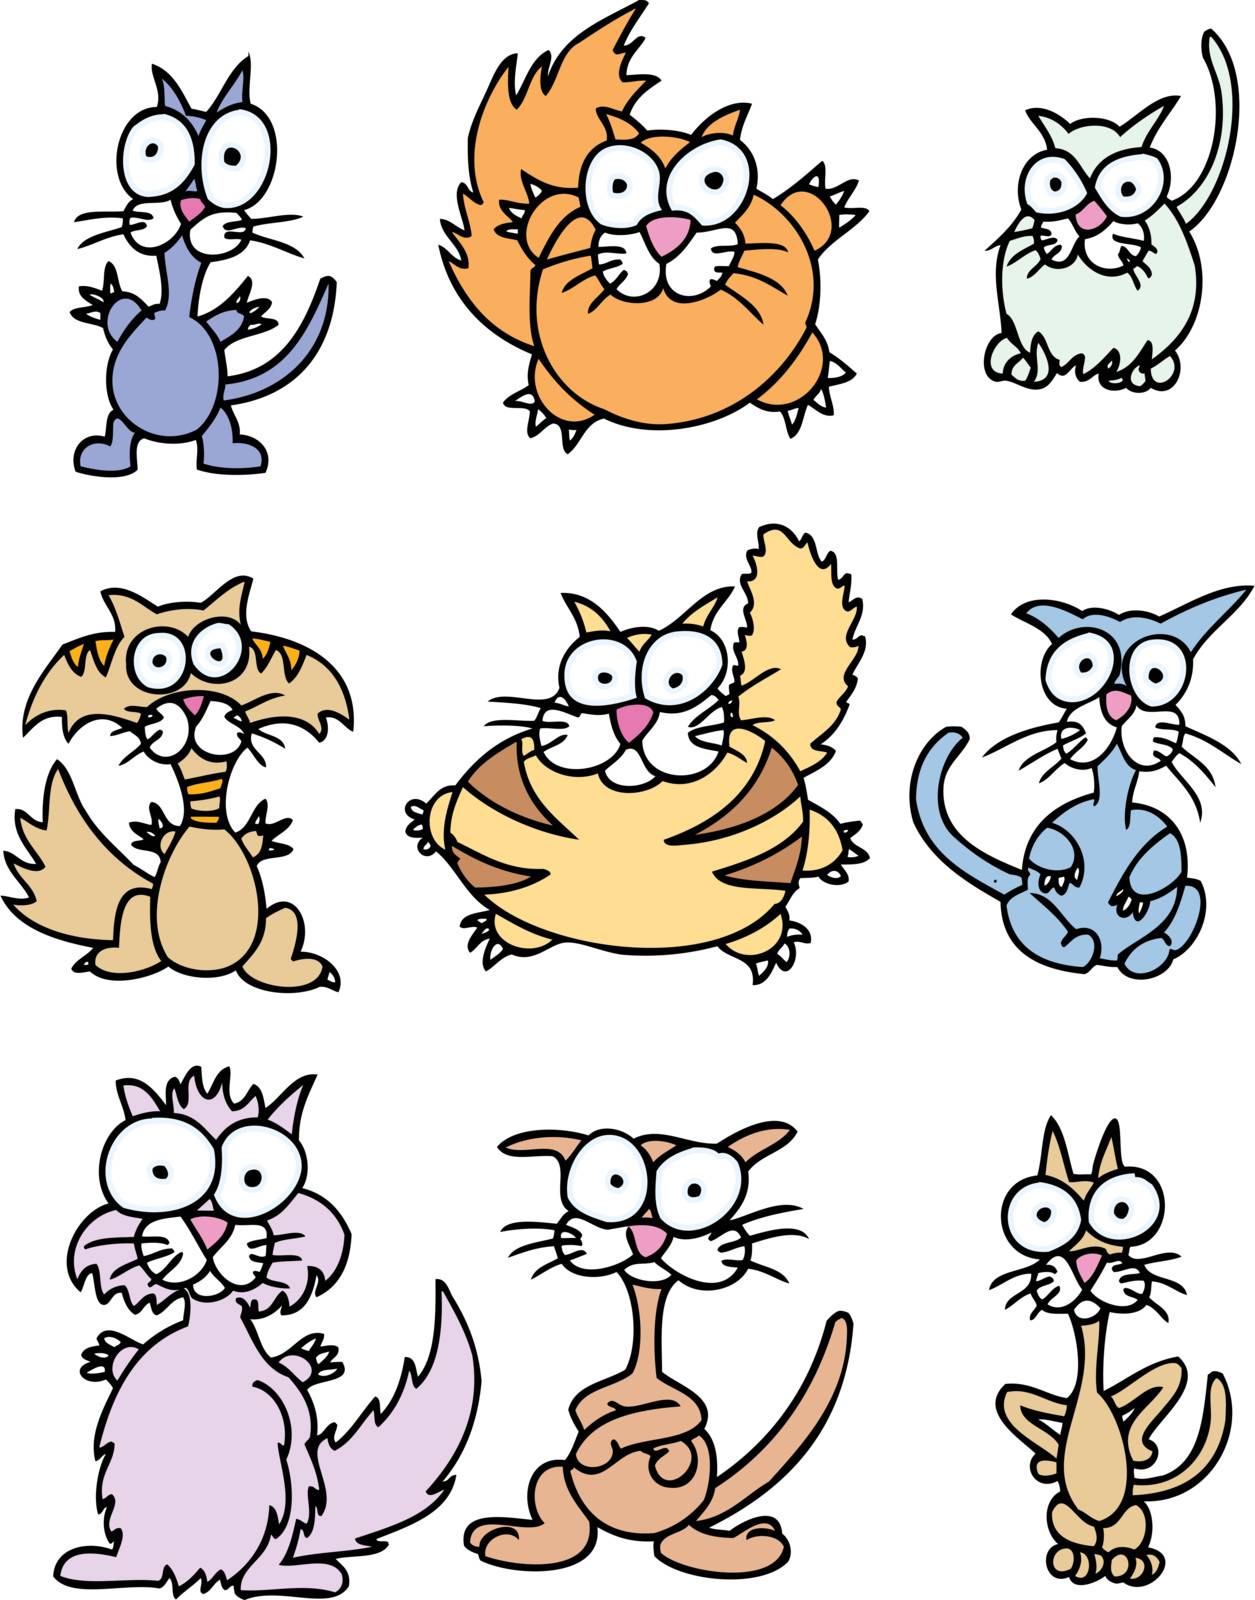 Cartoon Cats by cteconsulting